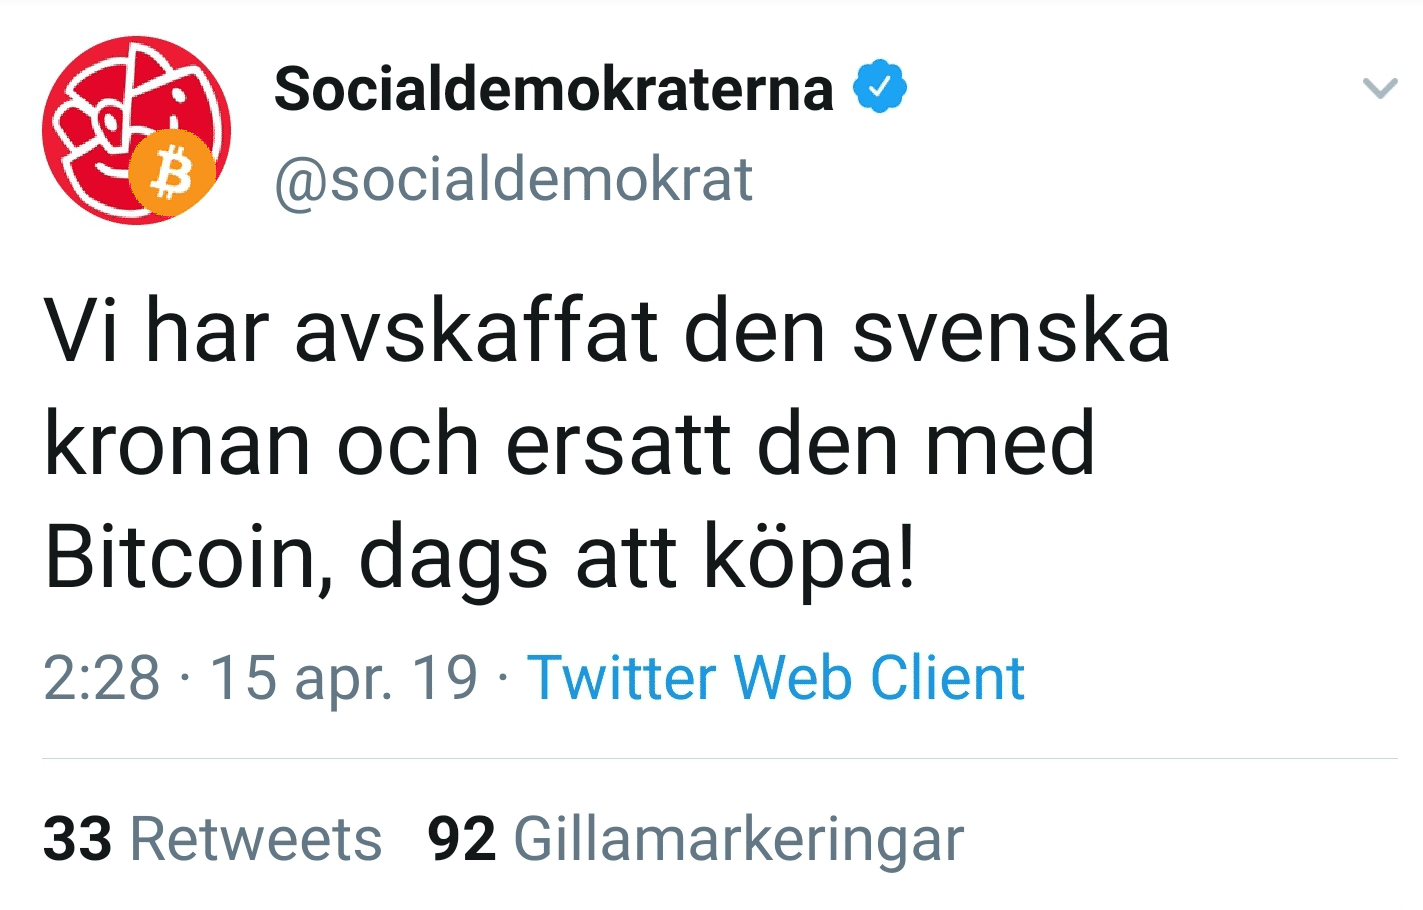 Swedish Social Democratic Party's Twitter account hacked.